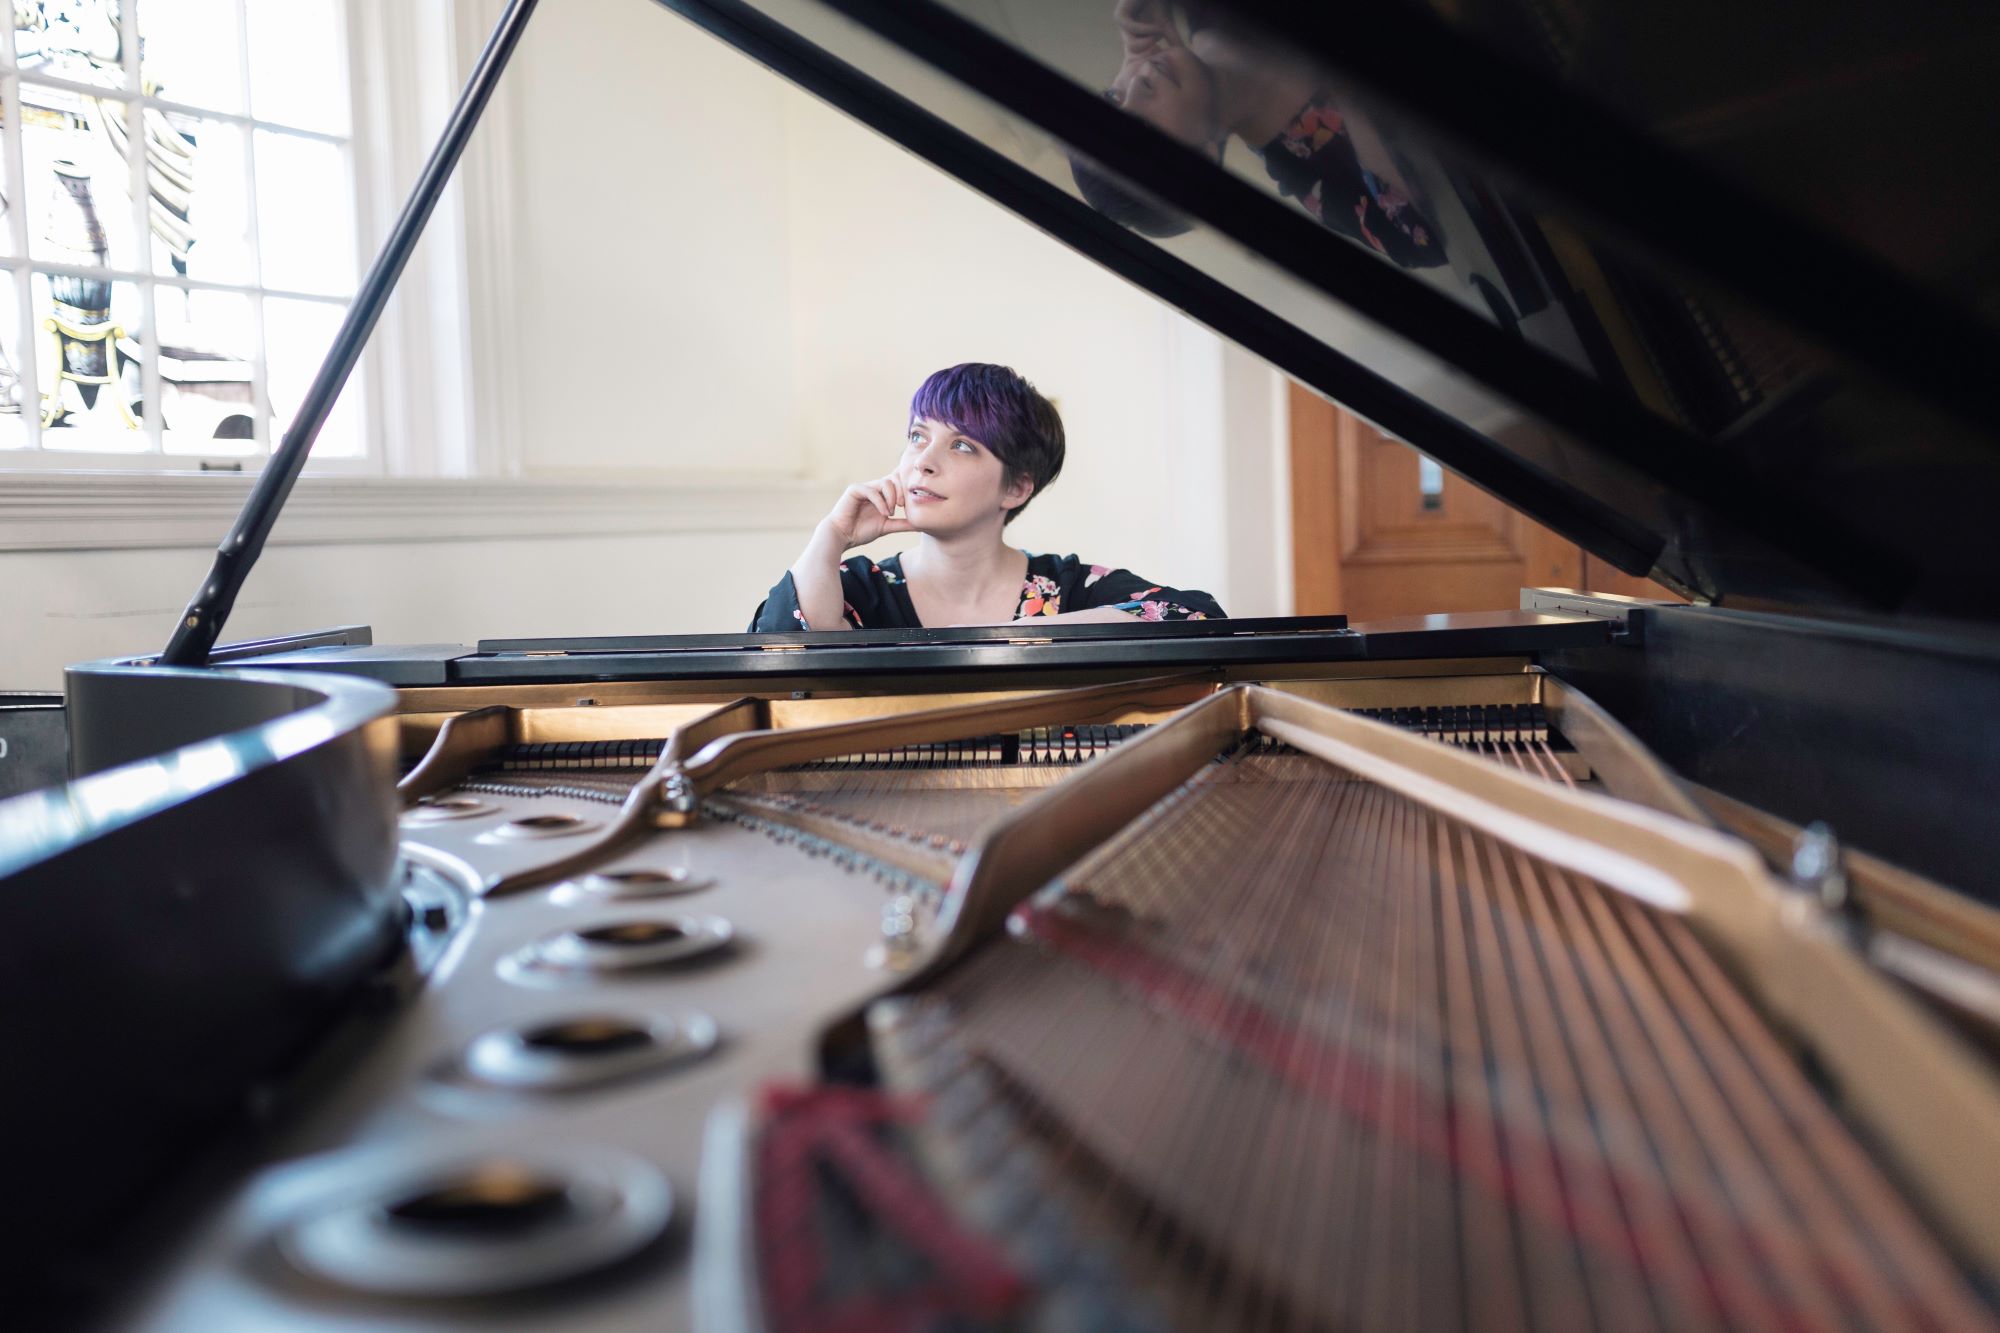 A woman with purple hair sits at a piano and stares off into the distance.